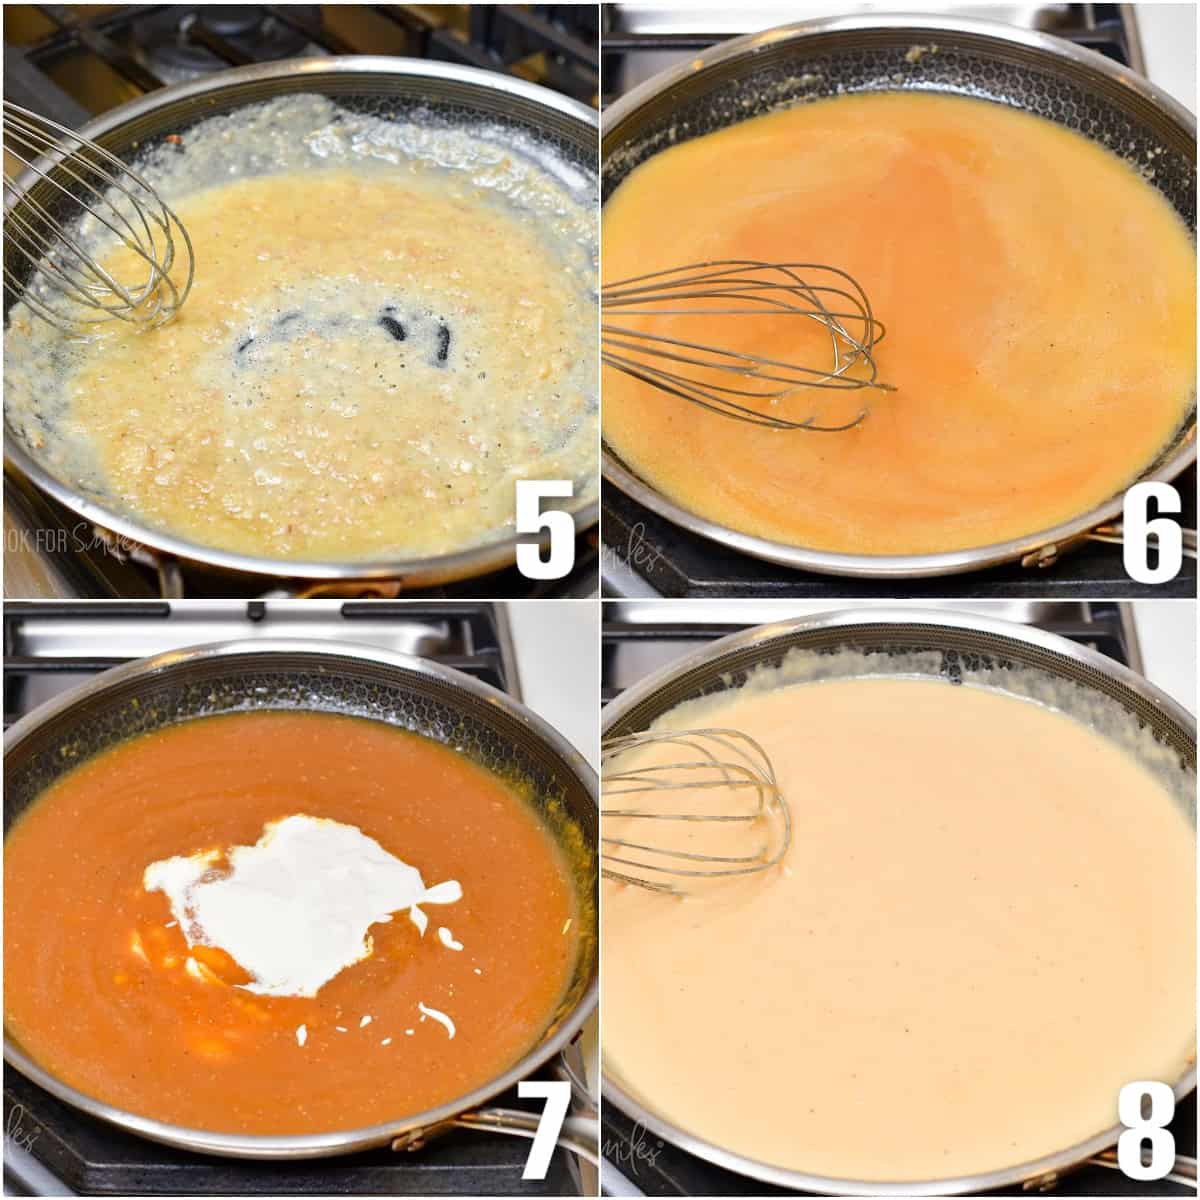 A roux is formed in the first photo. In the second photo, a whisk is mixing beef stock into the roux. In the third photo, creamy ingredients are added to the skillet. In the final photo, a creamy gravy is presented. 